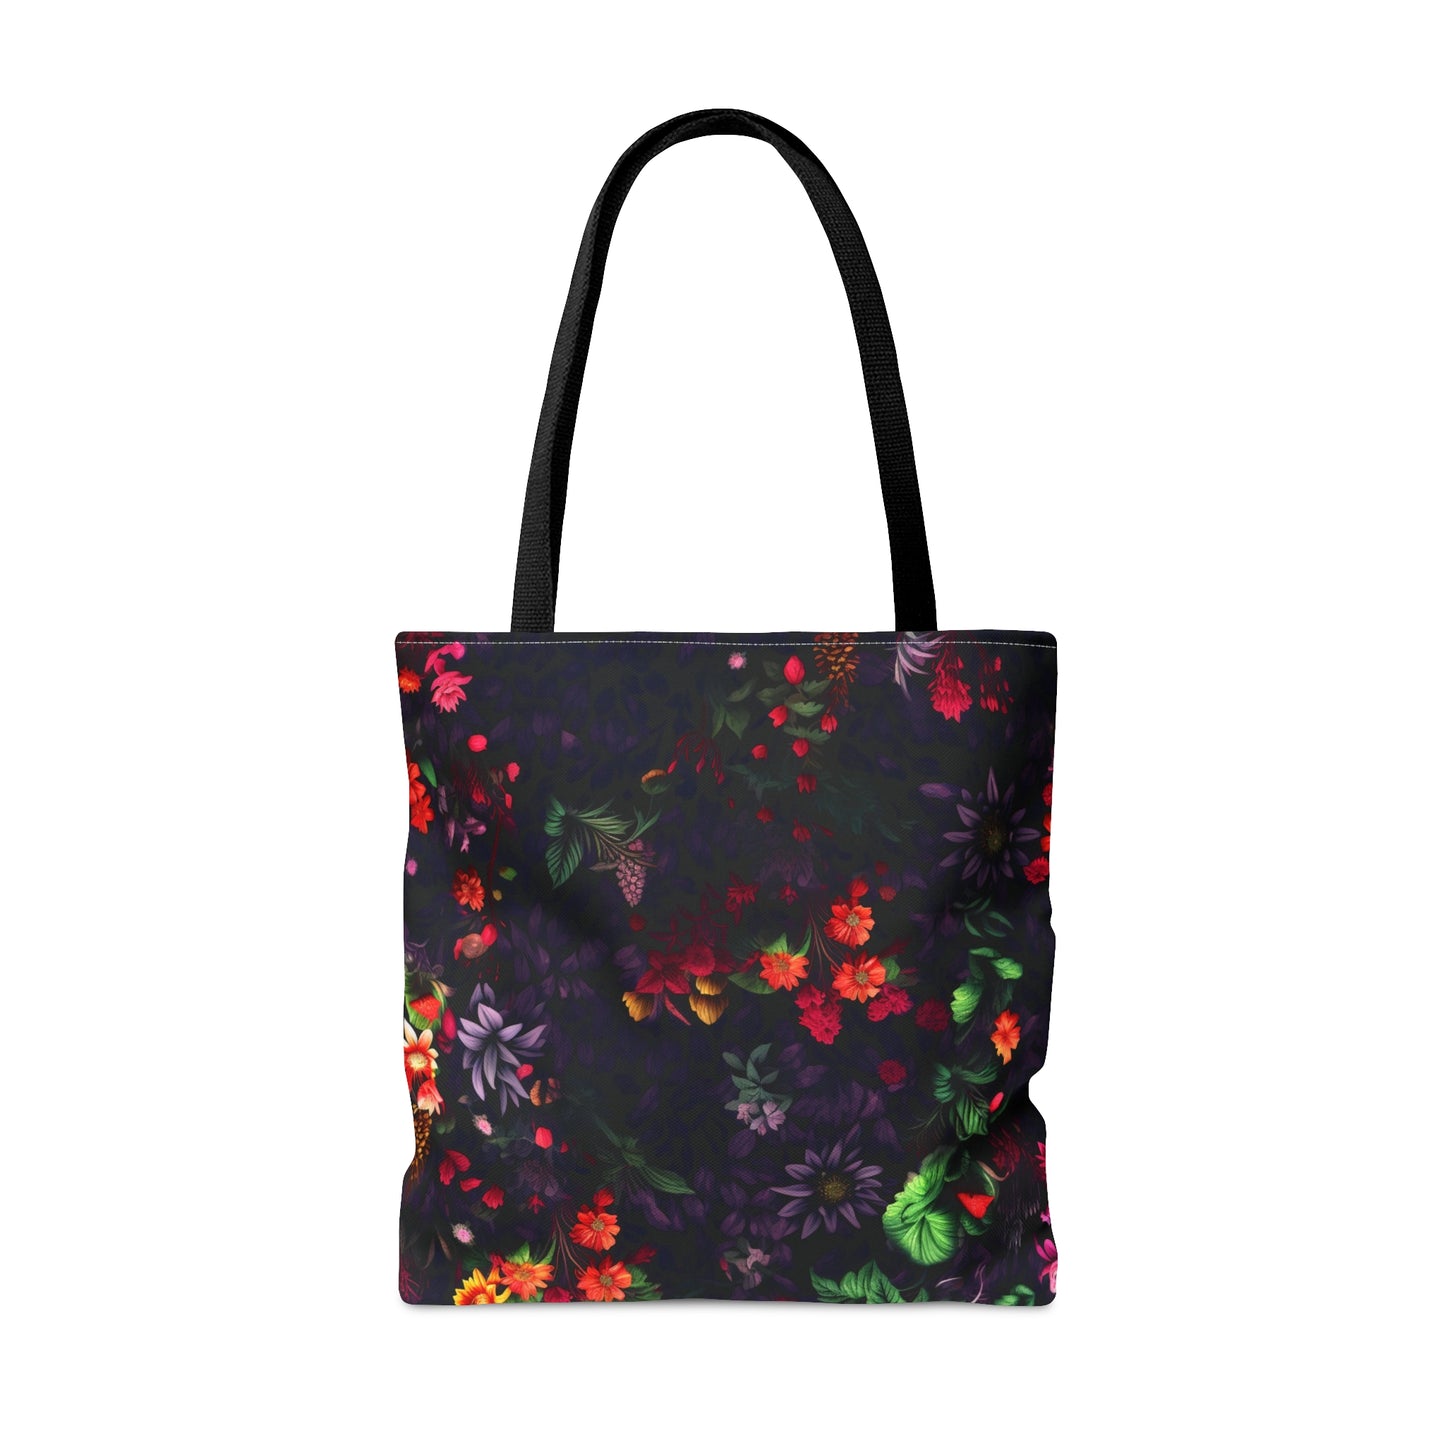 Neduz Designs Artified Floral All-Over Print Tote Bag - Versatile and Durable for Everyday Use